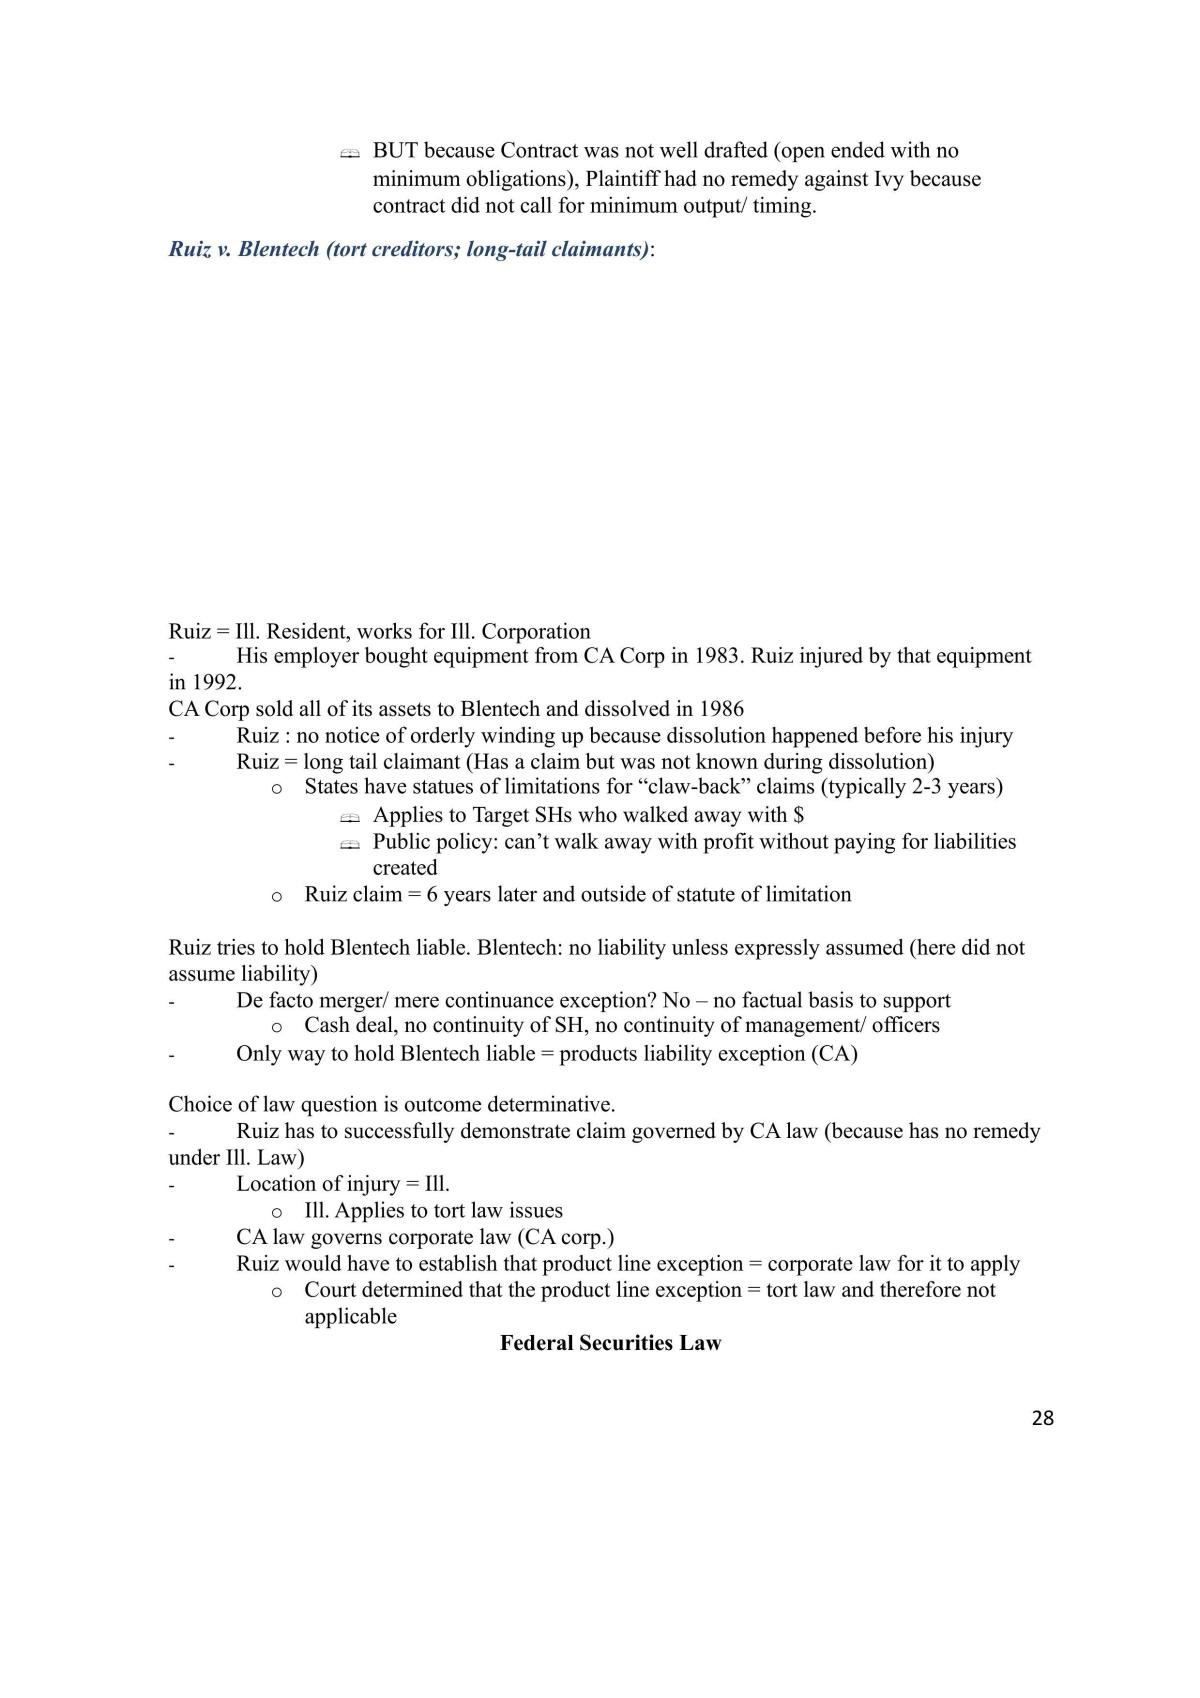 Notes for Mergers and Acquisitions - Page 28